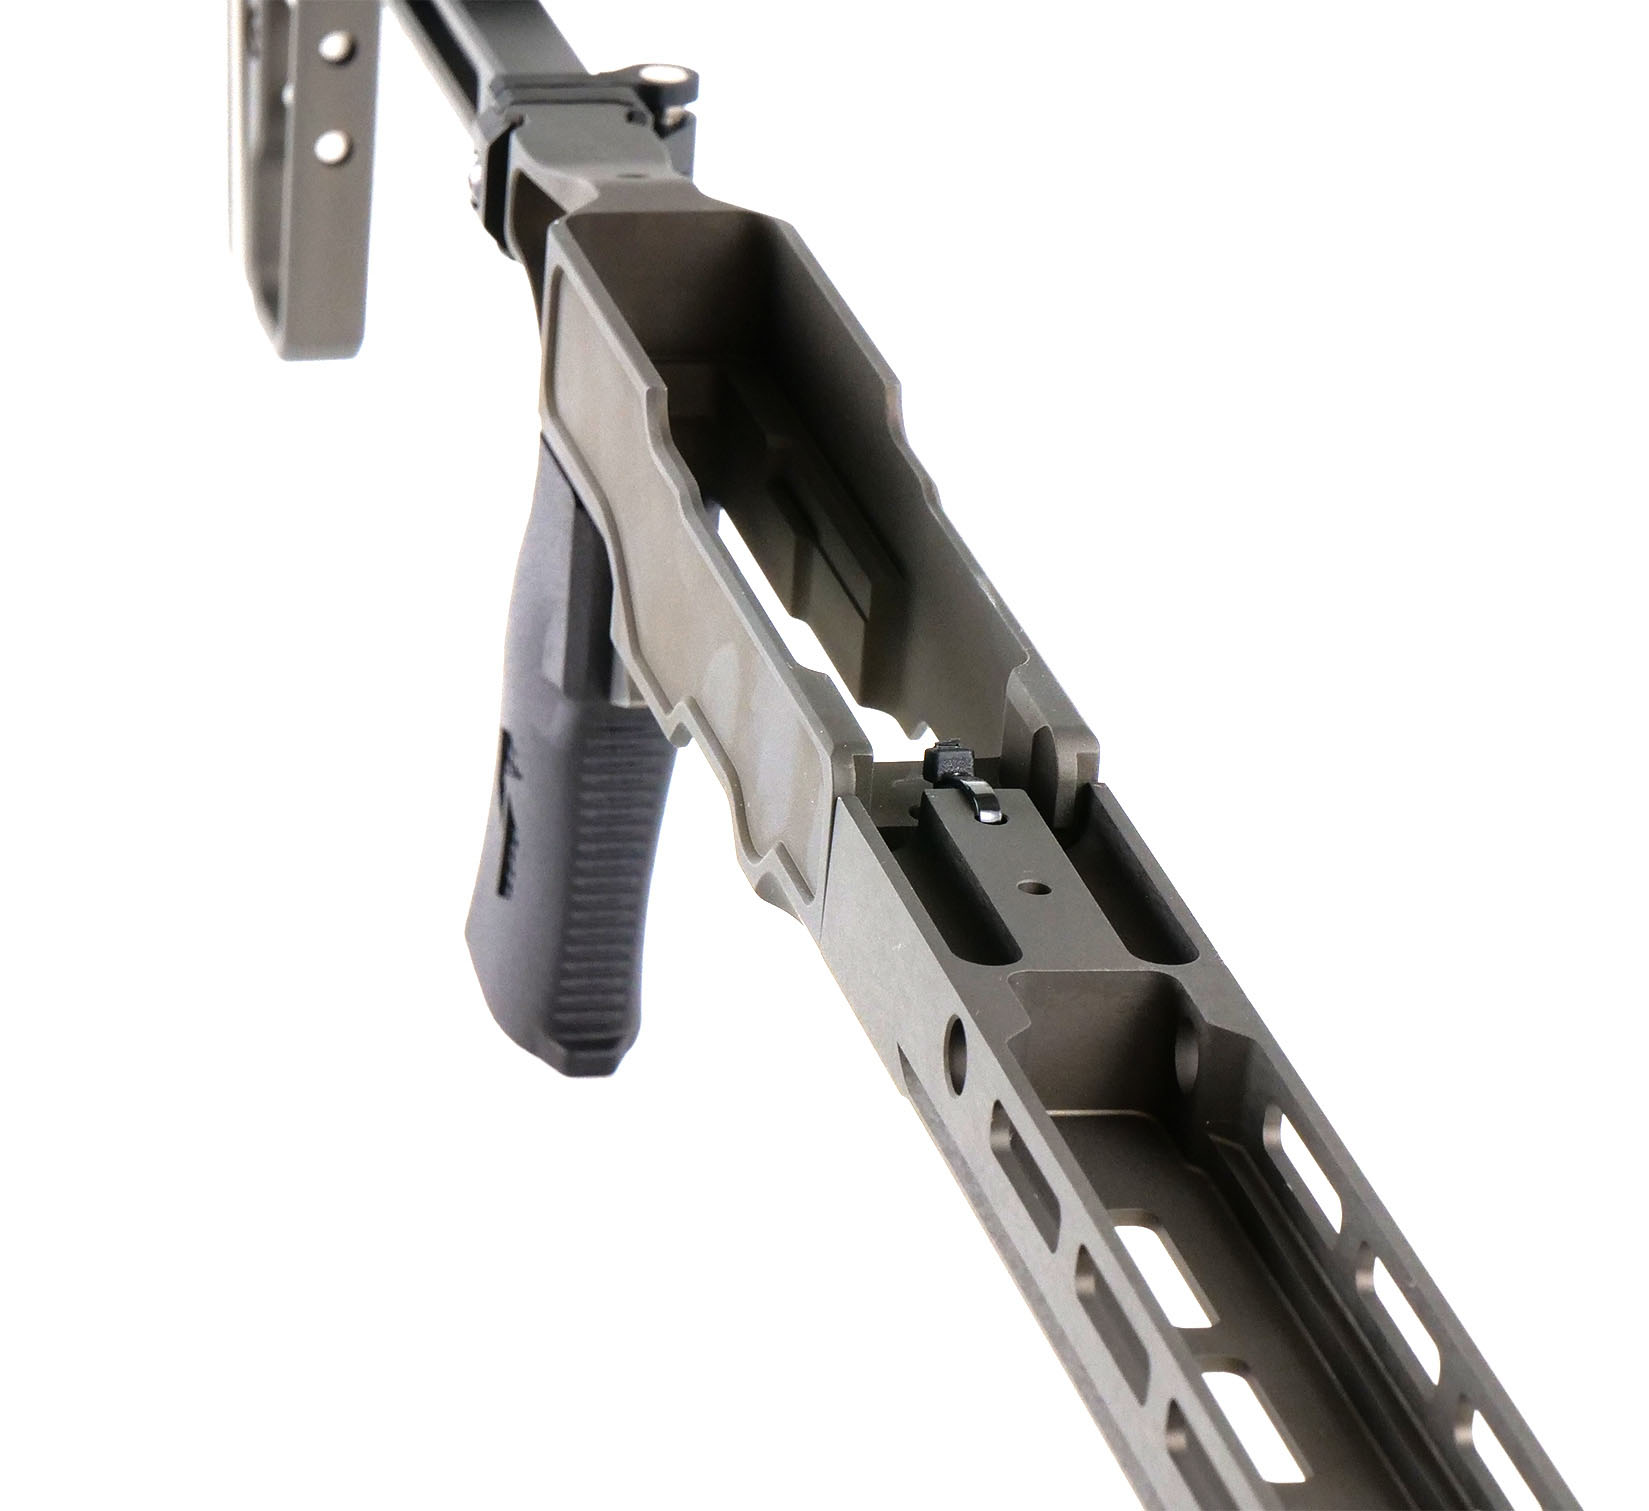 Foundation Takedown Chassis w/ Folding Stock/Forend/Grip